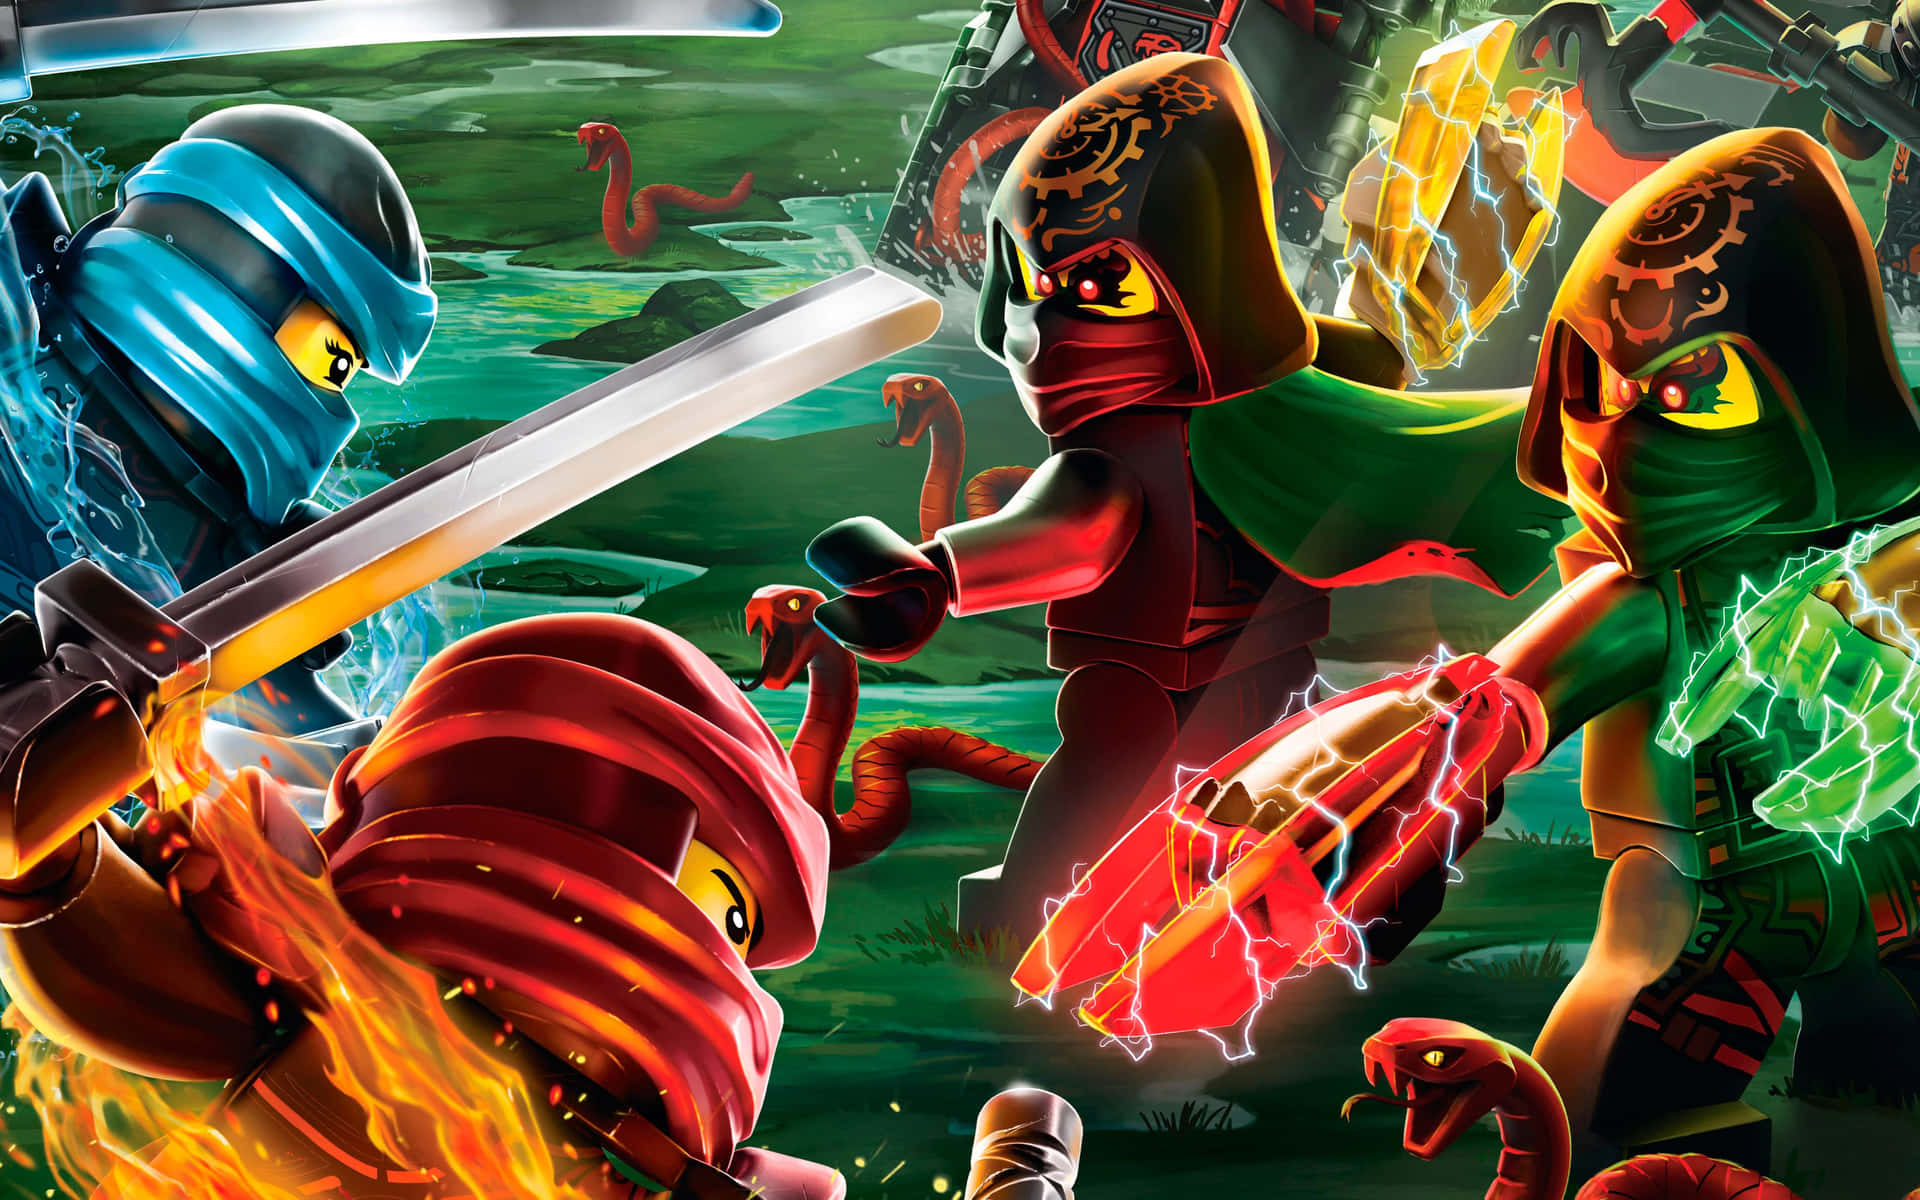 The Ninjago Team Leaping into Action